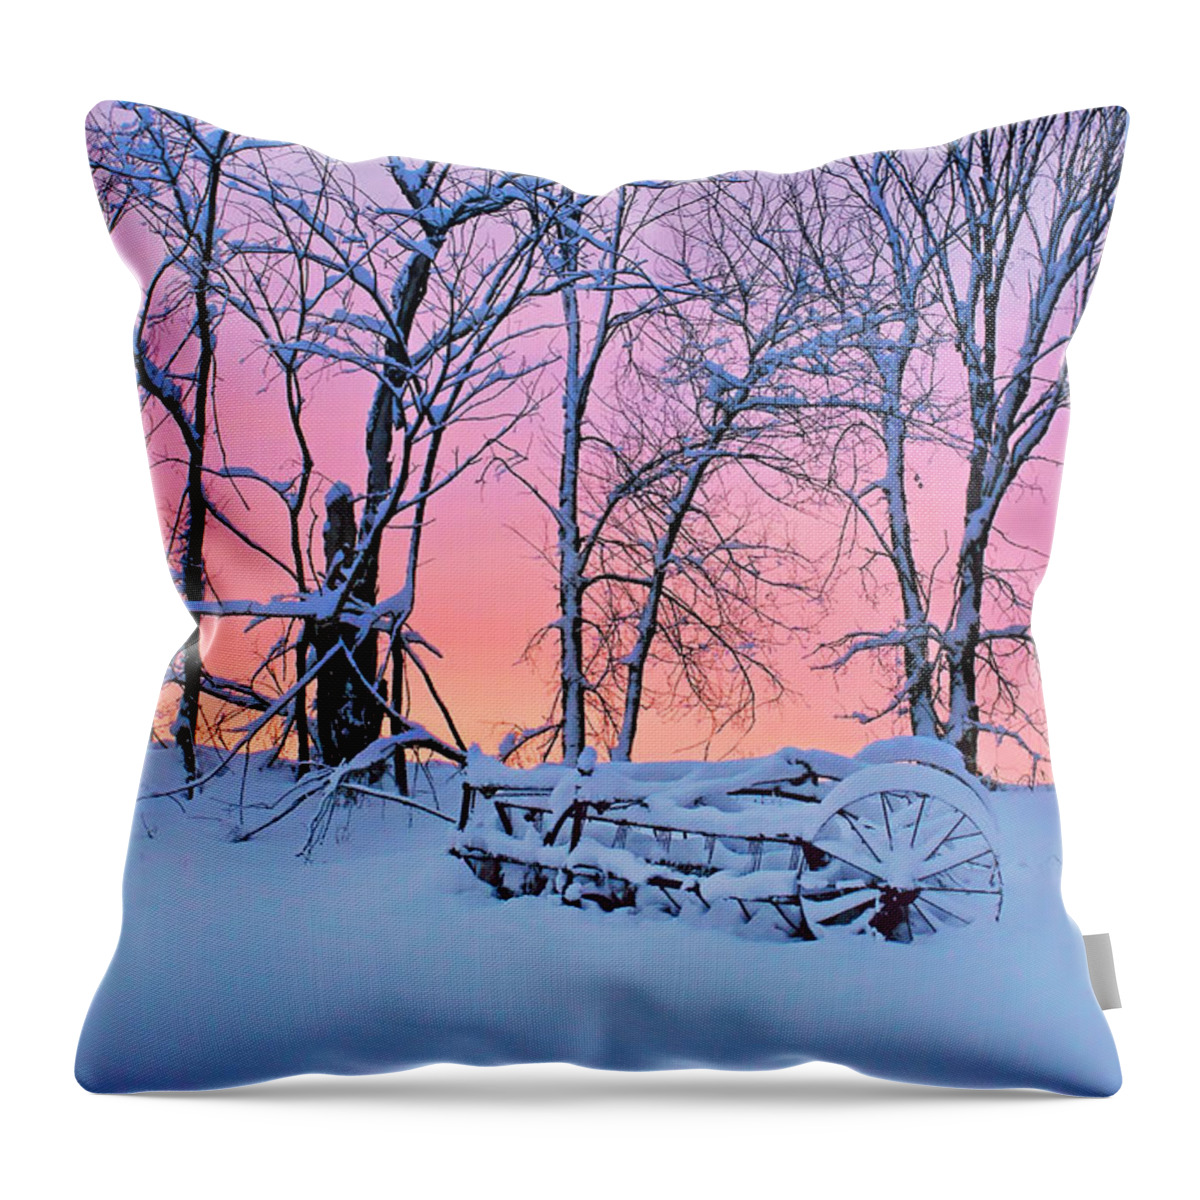 Winter Throw Pillow featuring the photograph Old Hayrake - Winter Sunset by Nikolyn McDonald